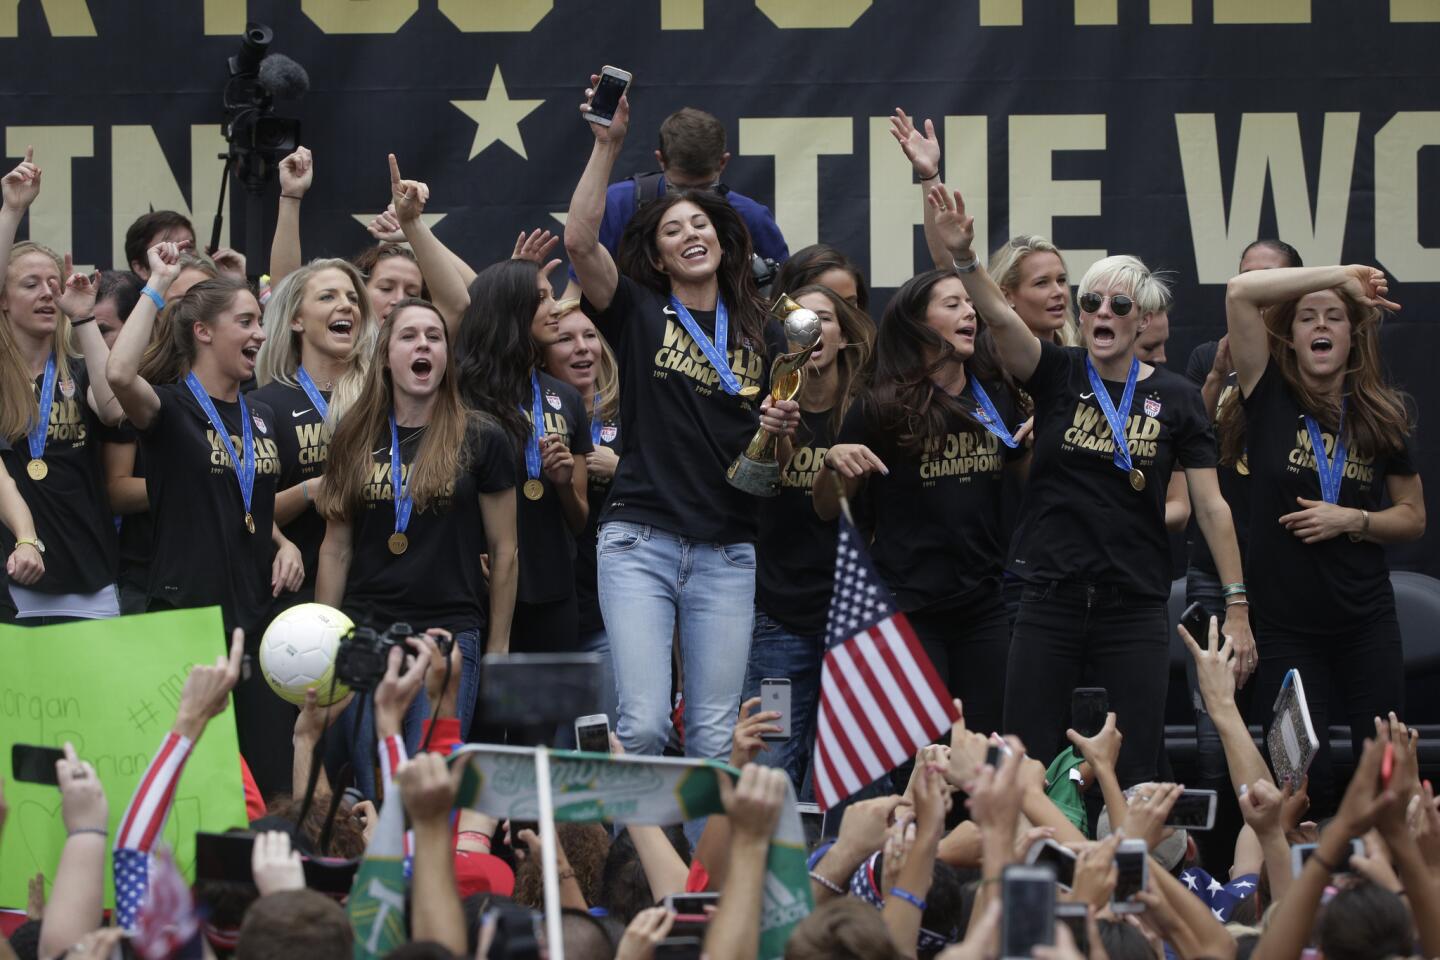 Members of the U.S. women's soccer team and fans celebrate the team's World Cup championship during a public celebration, Tuesday, July 7, 2015, in Los Angeles. This was the first U.S. stop for the team since beating Japan in the Women's World Cup final Sunday in Canada. (AP Photo/Jae C. Hong)